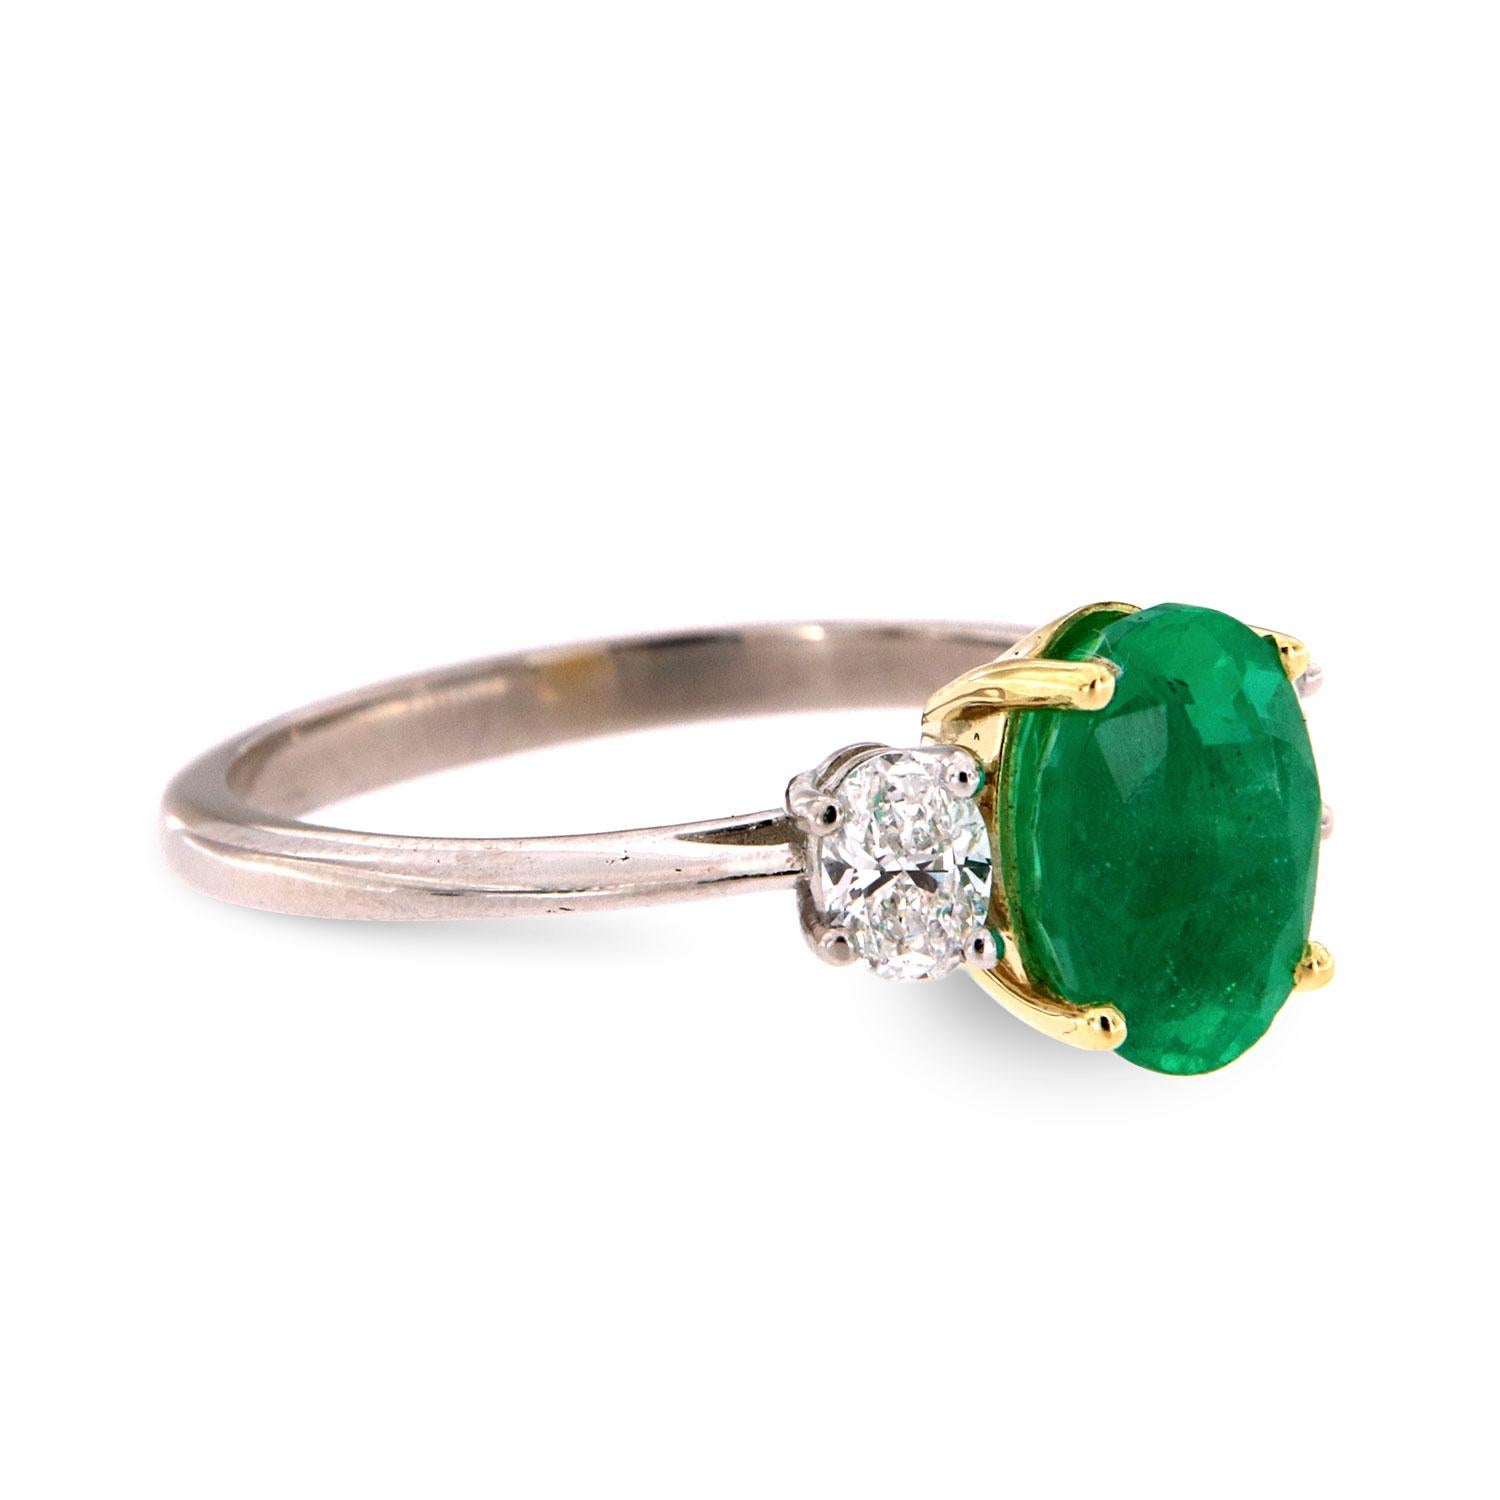 Oval Cut GIA Certified 1.86 Carat Oval Green Emerald Platinum & 18k YG Gold Diamond Ring  For Sale